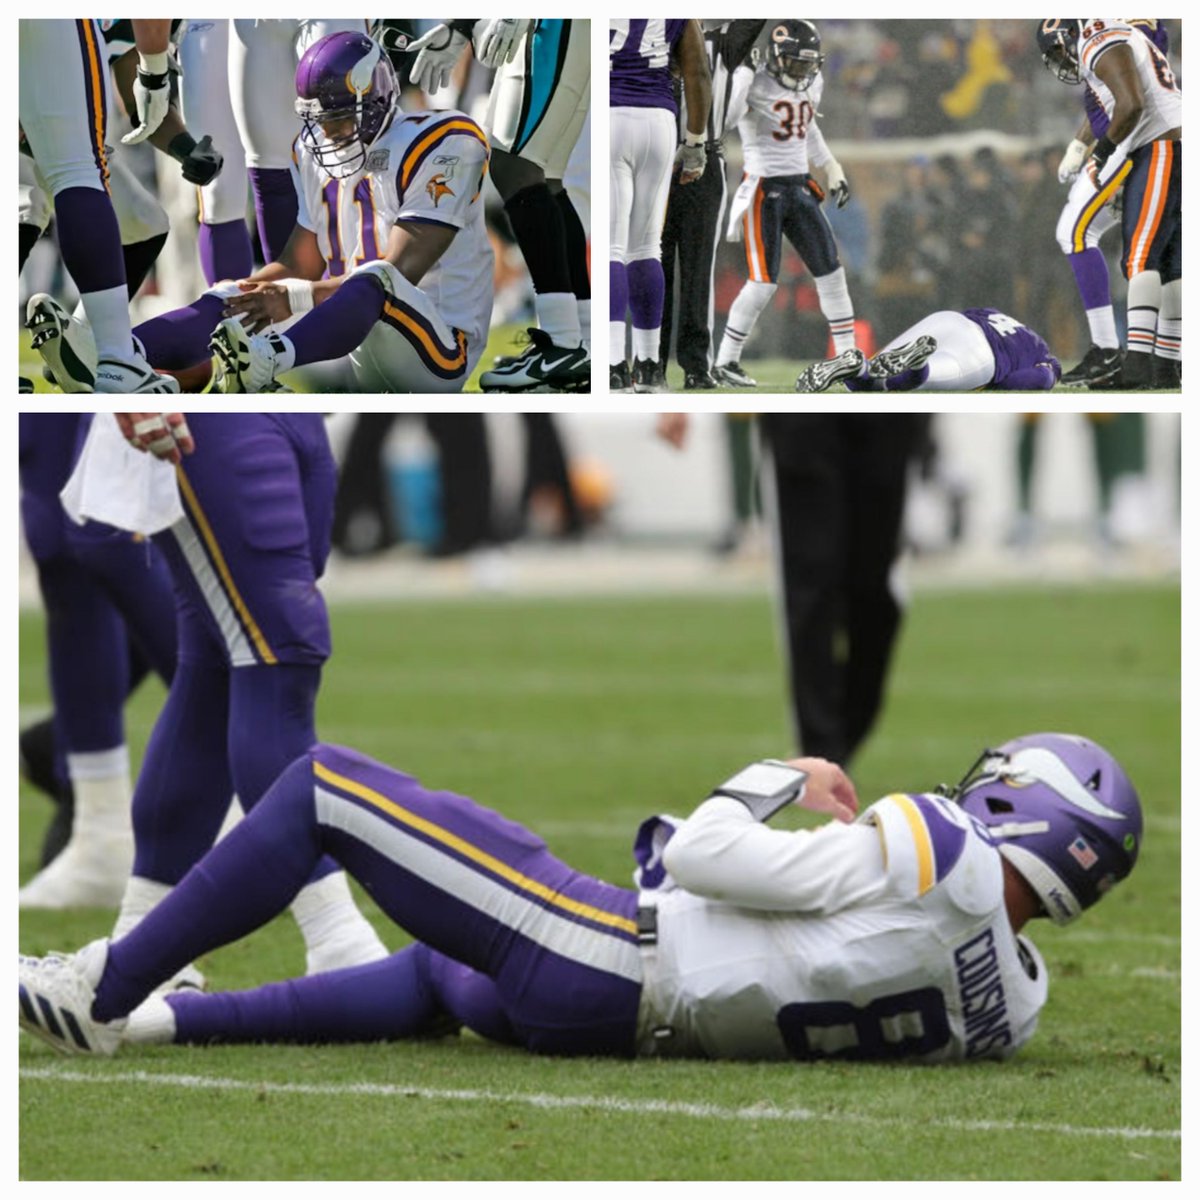 Kicking curse? This is the last snap for 3 of the last 4 pro bowl QBs the Vikings have had. The other? Teddy Bridgewater, who took a few sympathy snaps in 2017 after returning from that horrific injury.